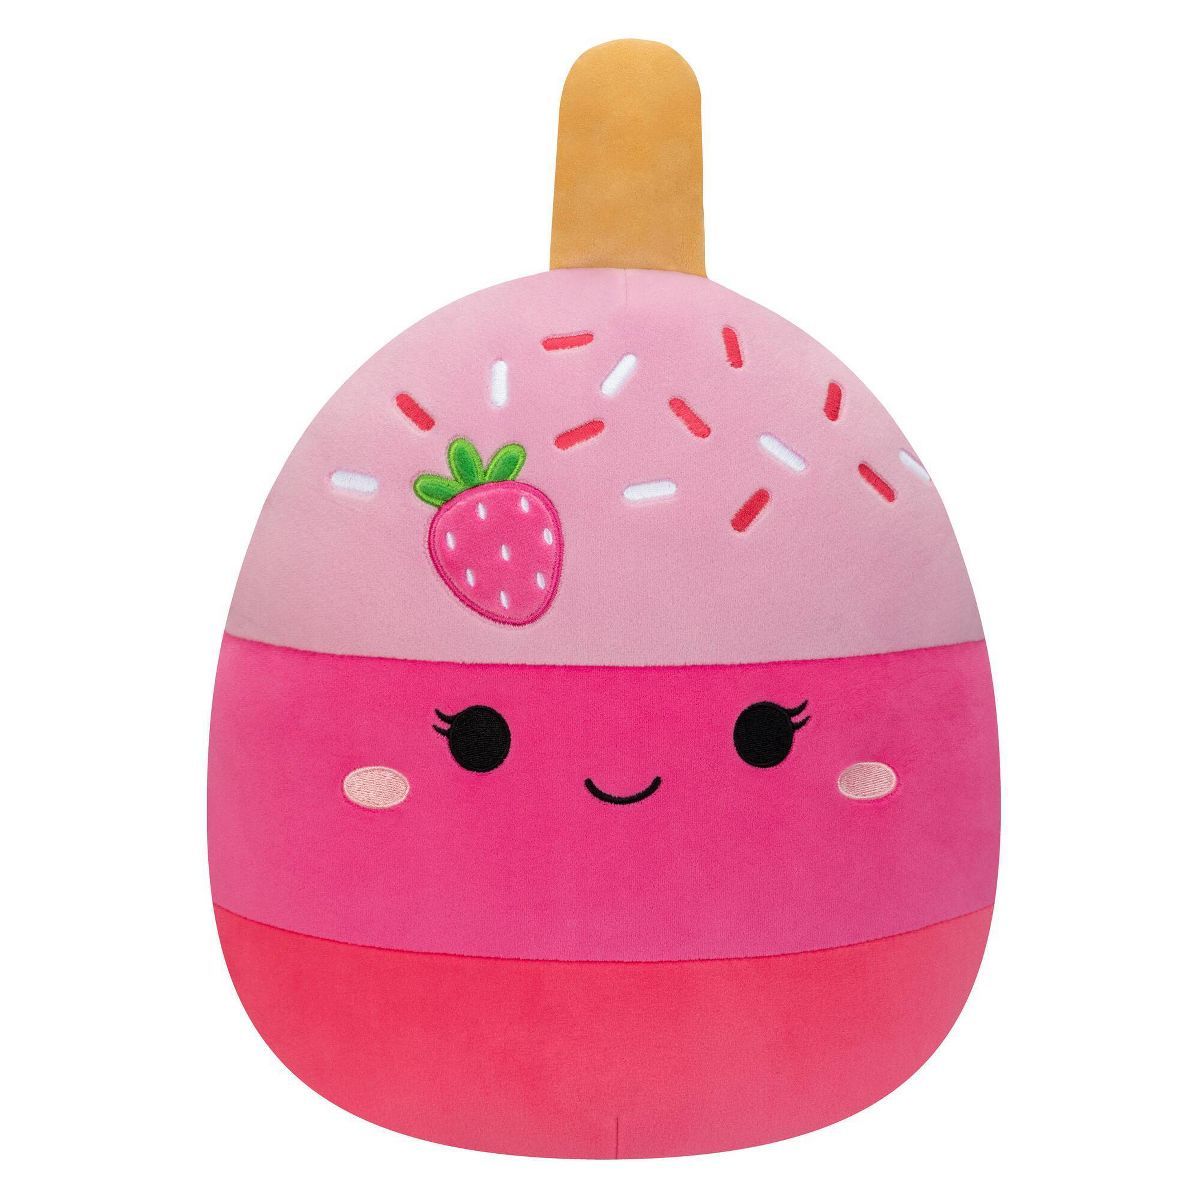 Squishmallows 11" Pama the Pink Strawberry Cake Pop Plush Toy | Target